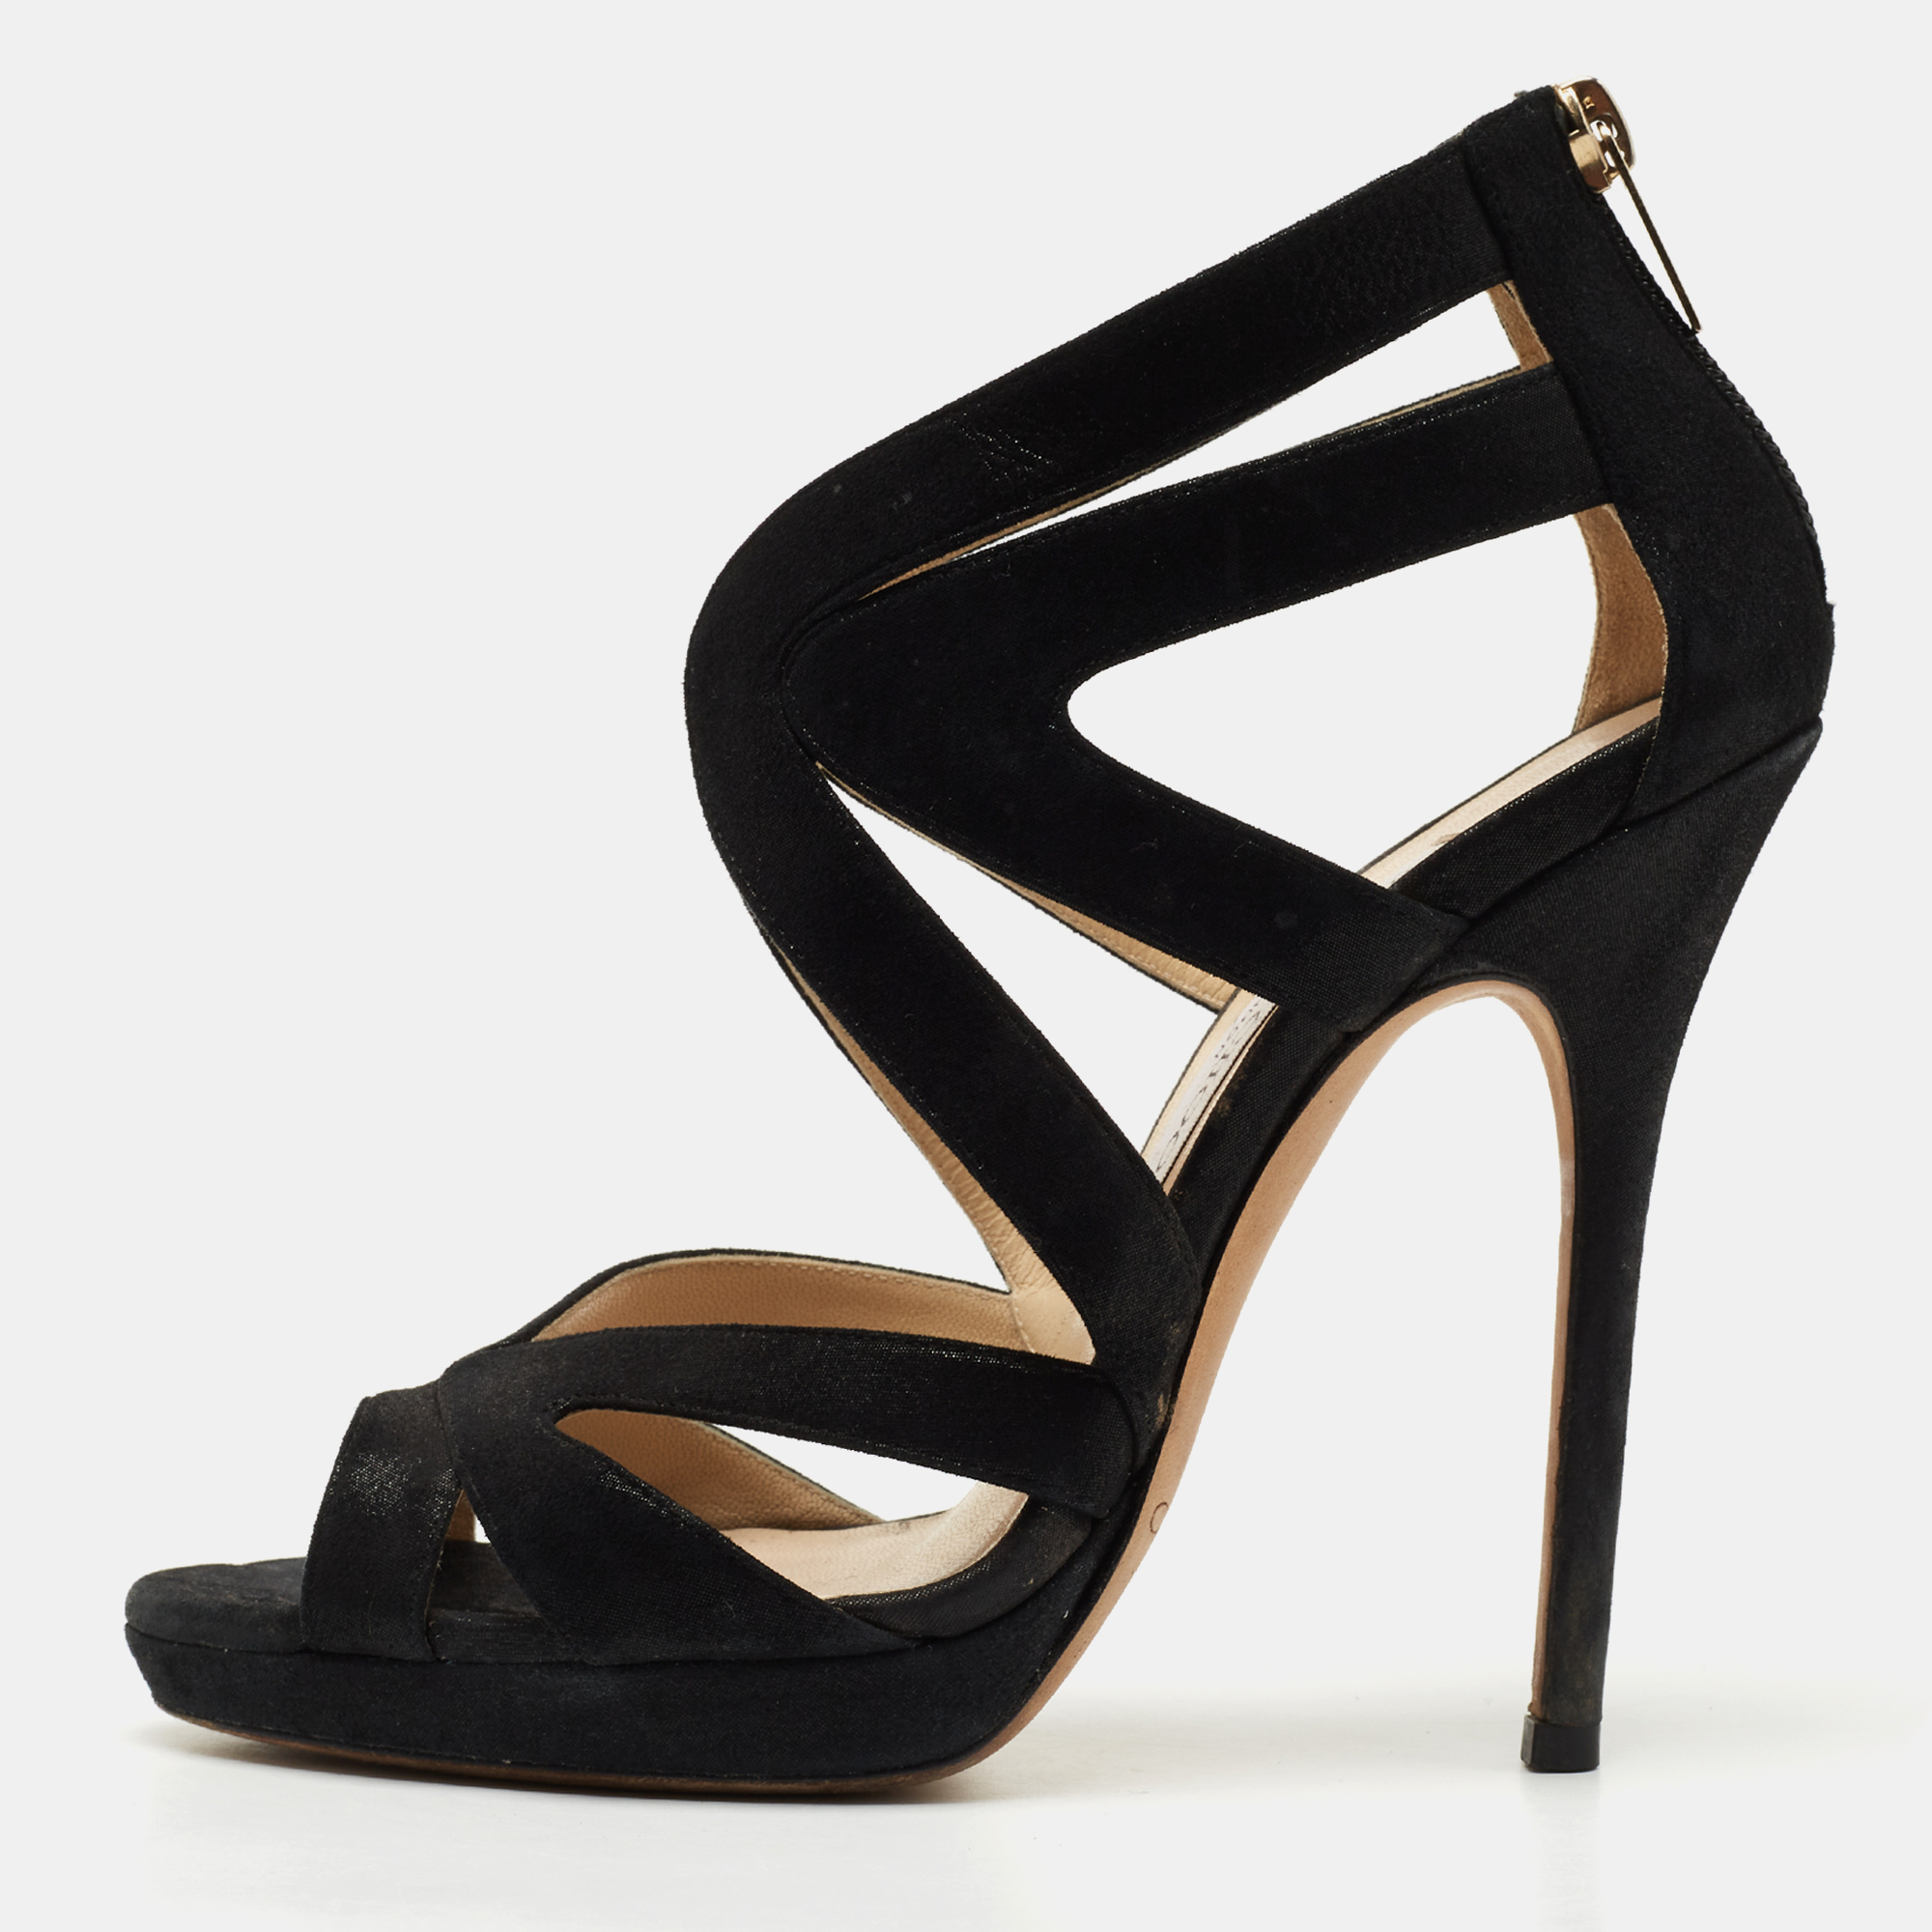 Pre-owned Jimmy Choo Black Suede Strappy Sandals Size 36